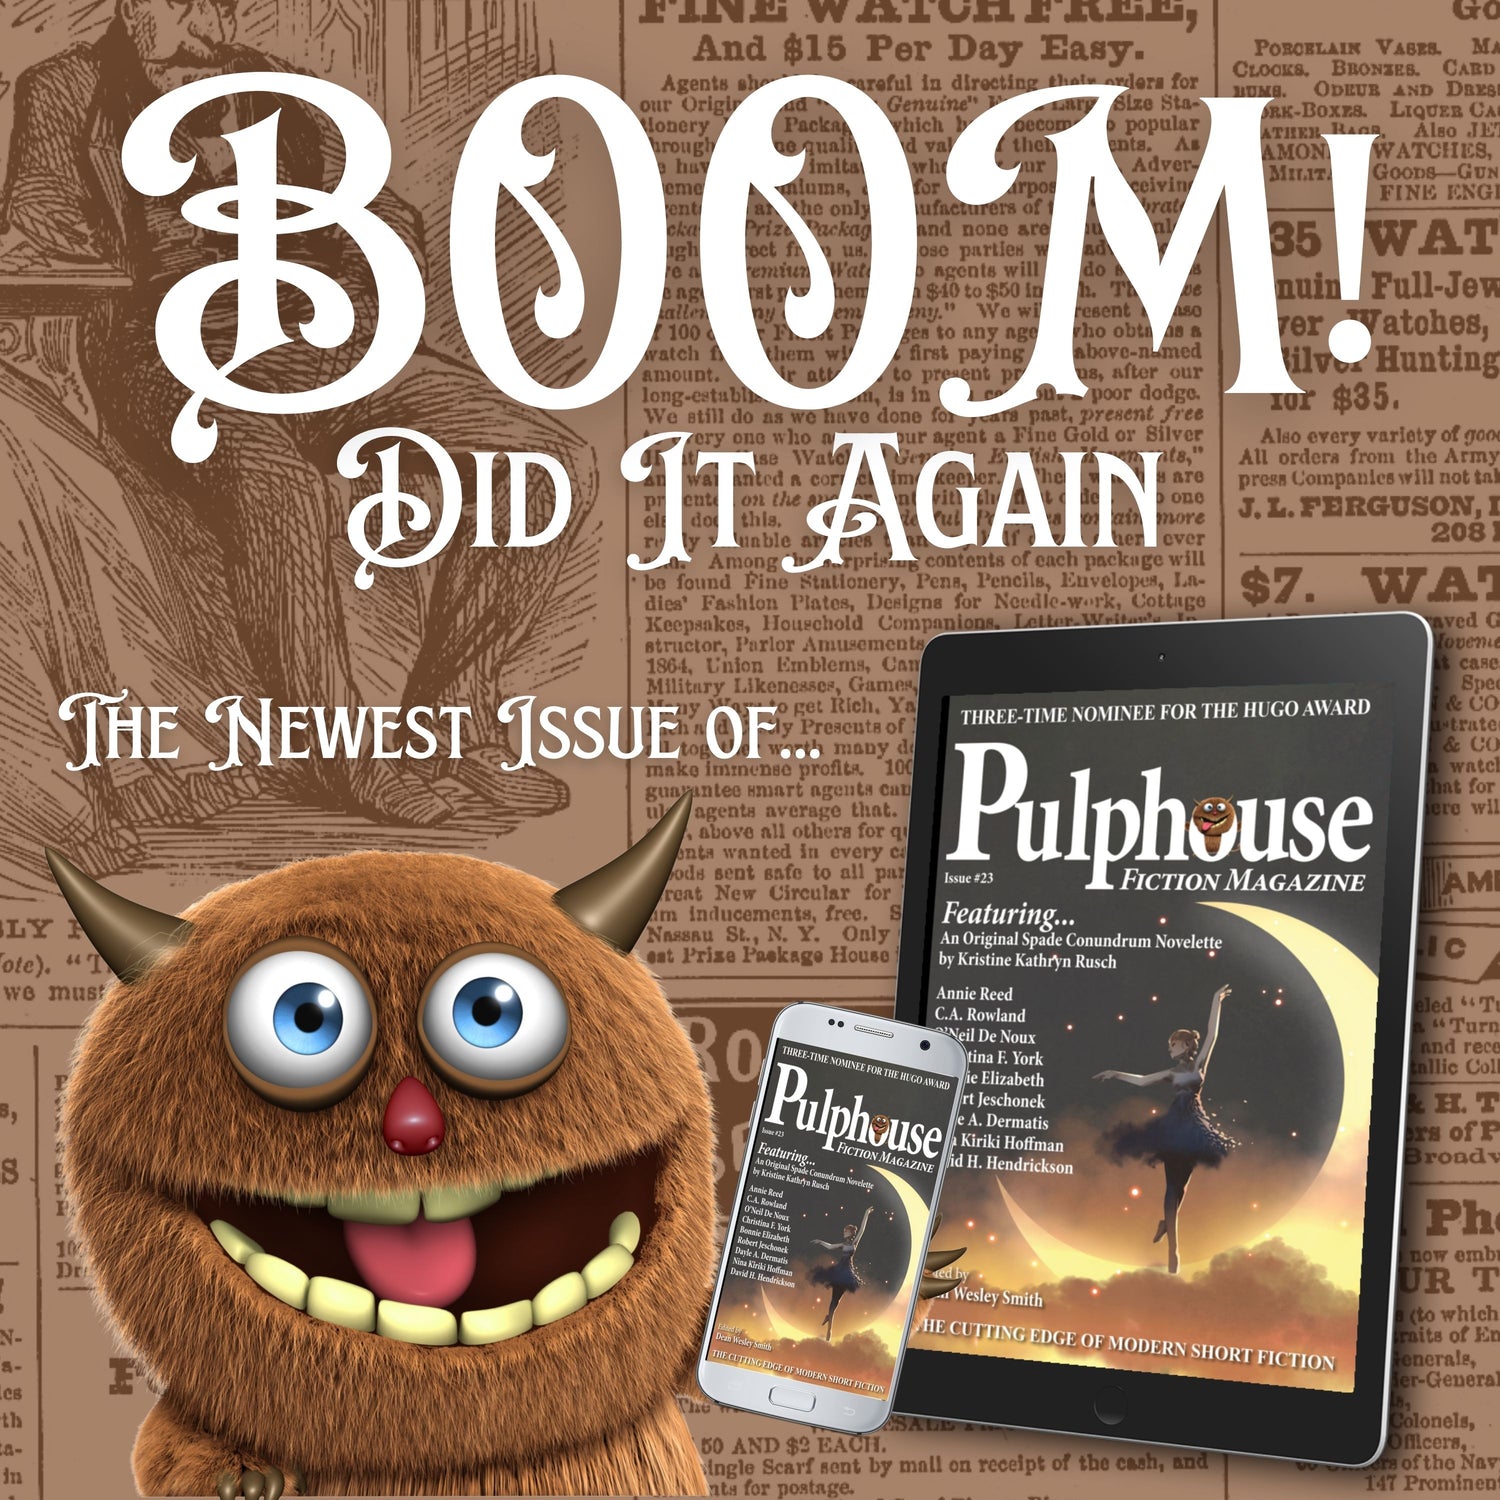 BOOM - Issue #23!!!